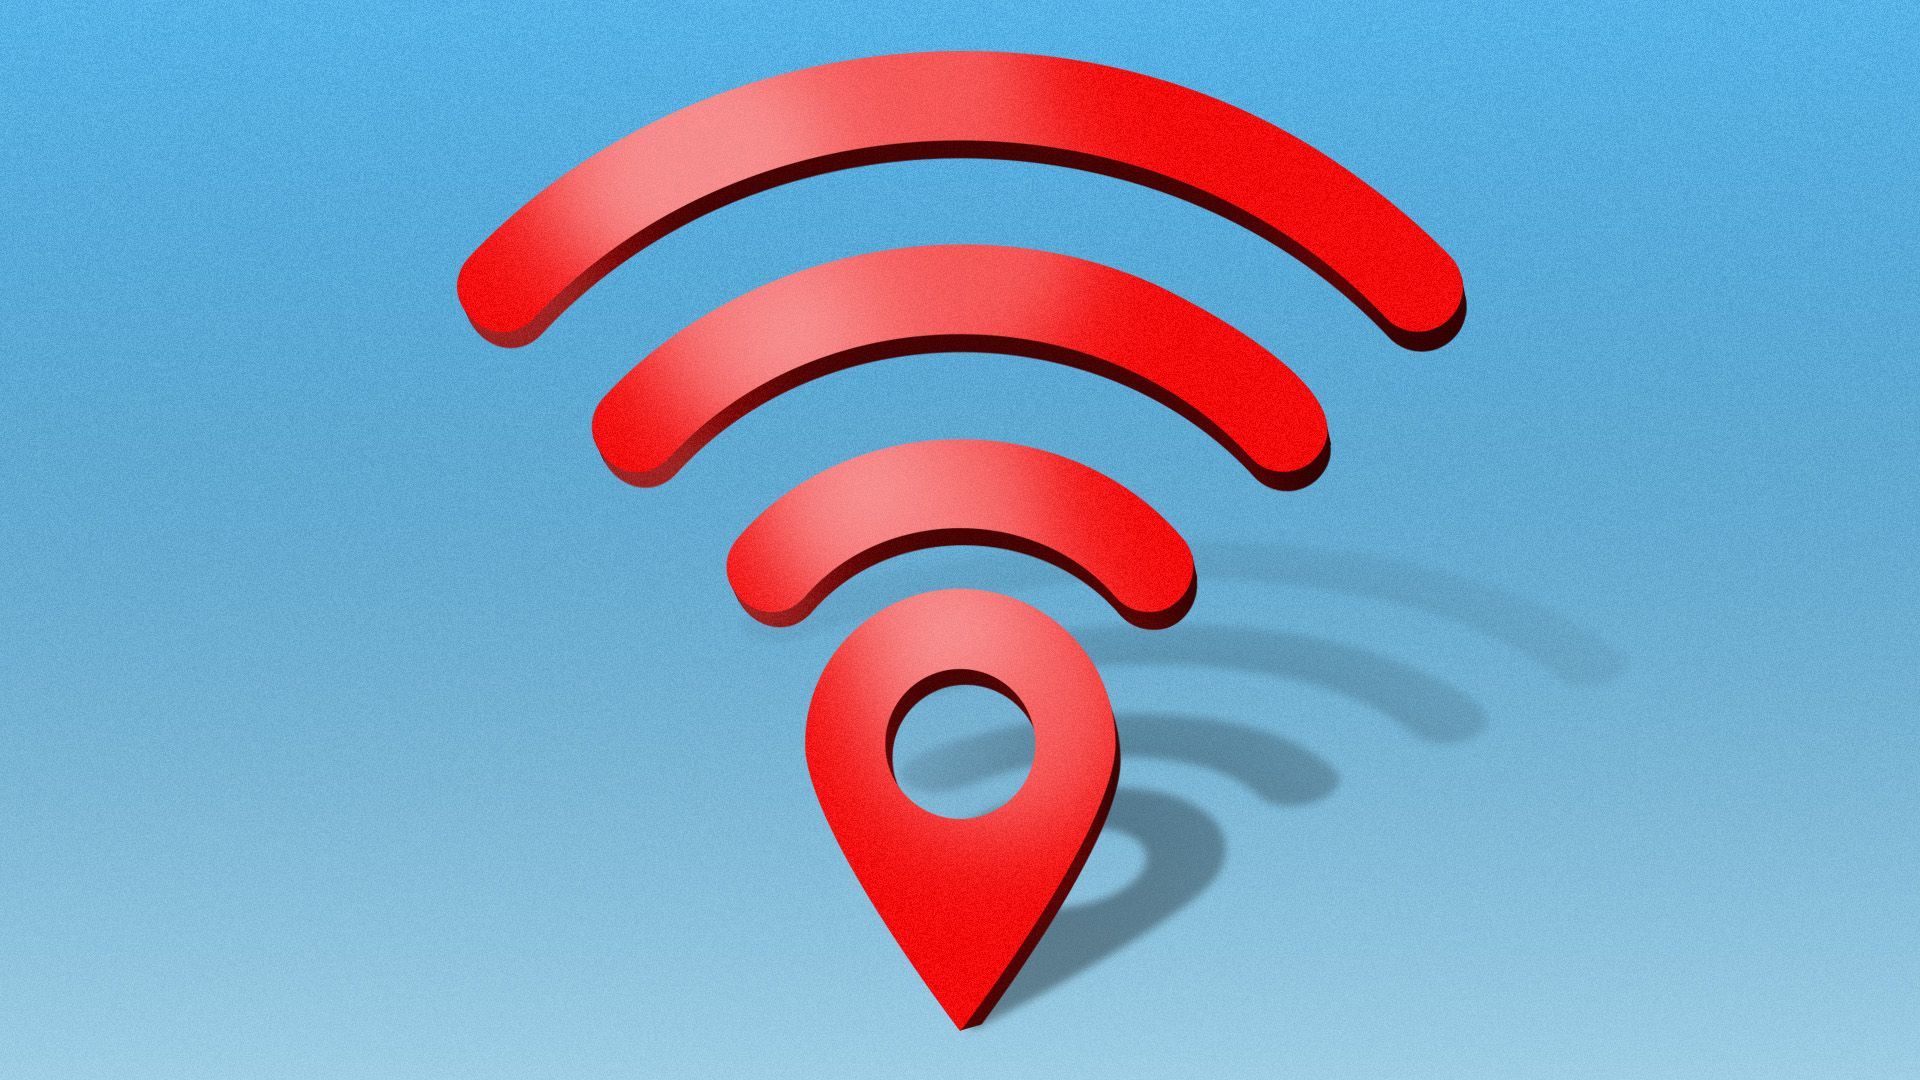 Illustration of a combined location and wifi symbol 